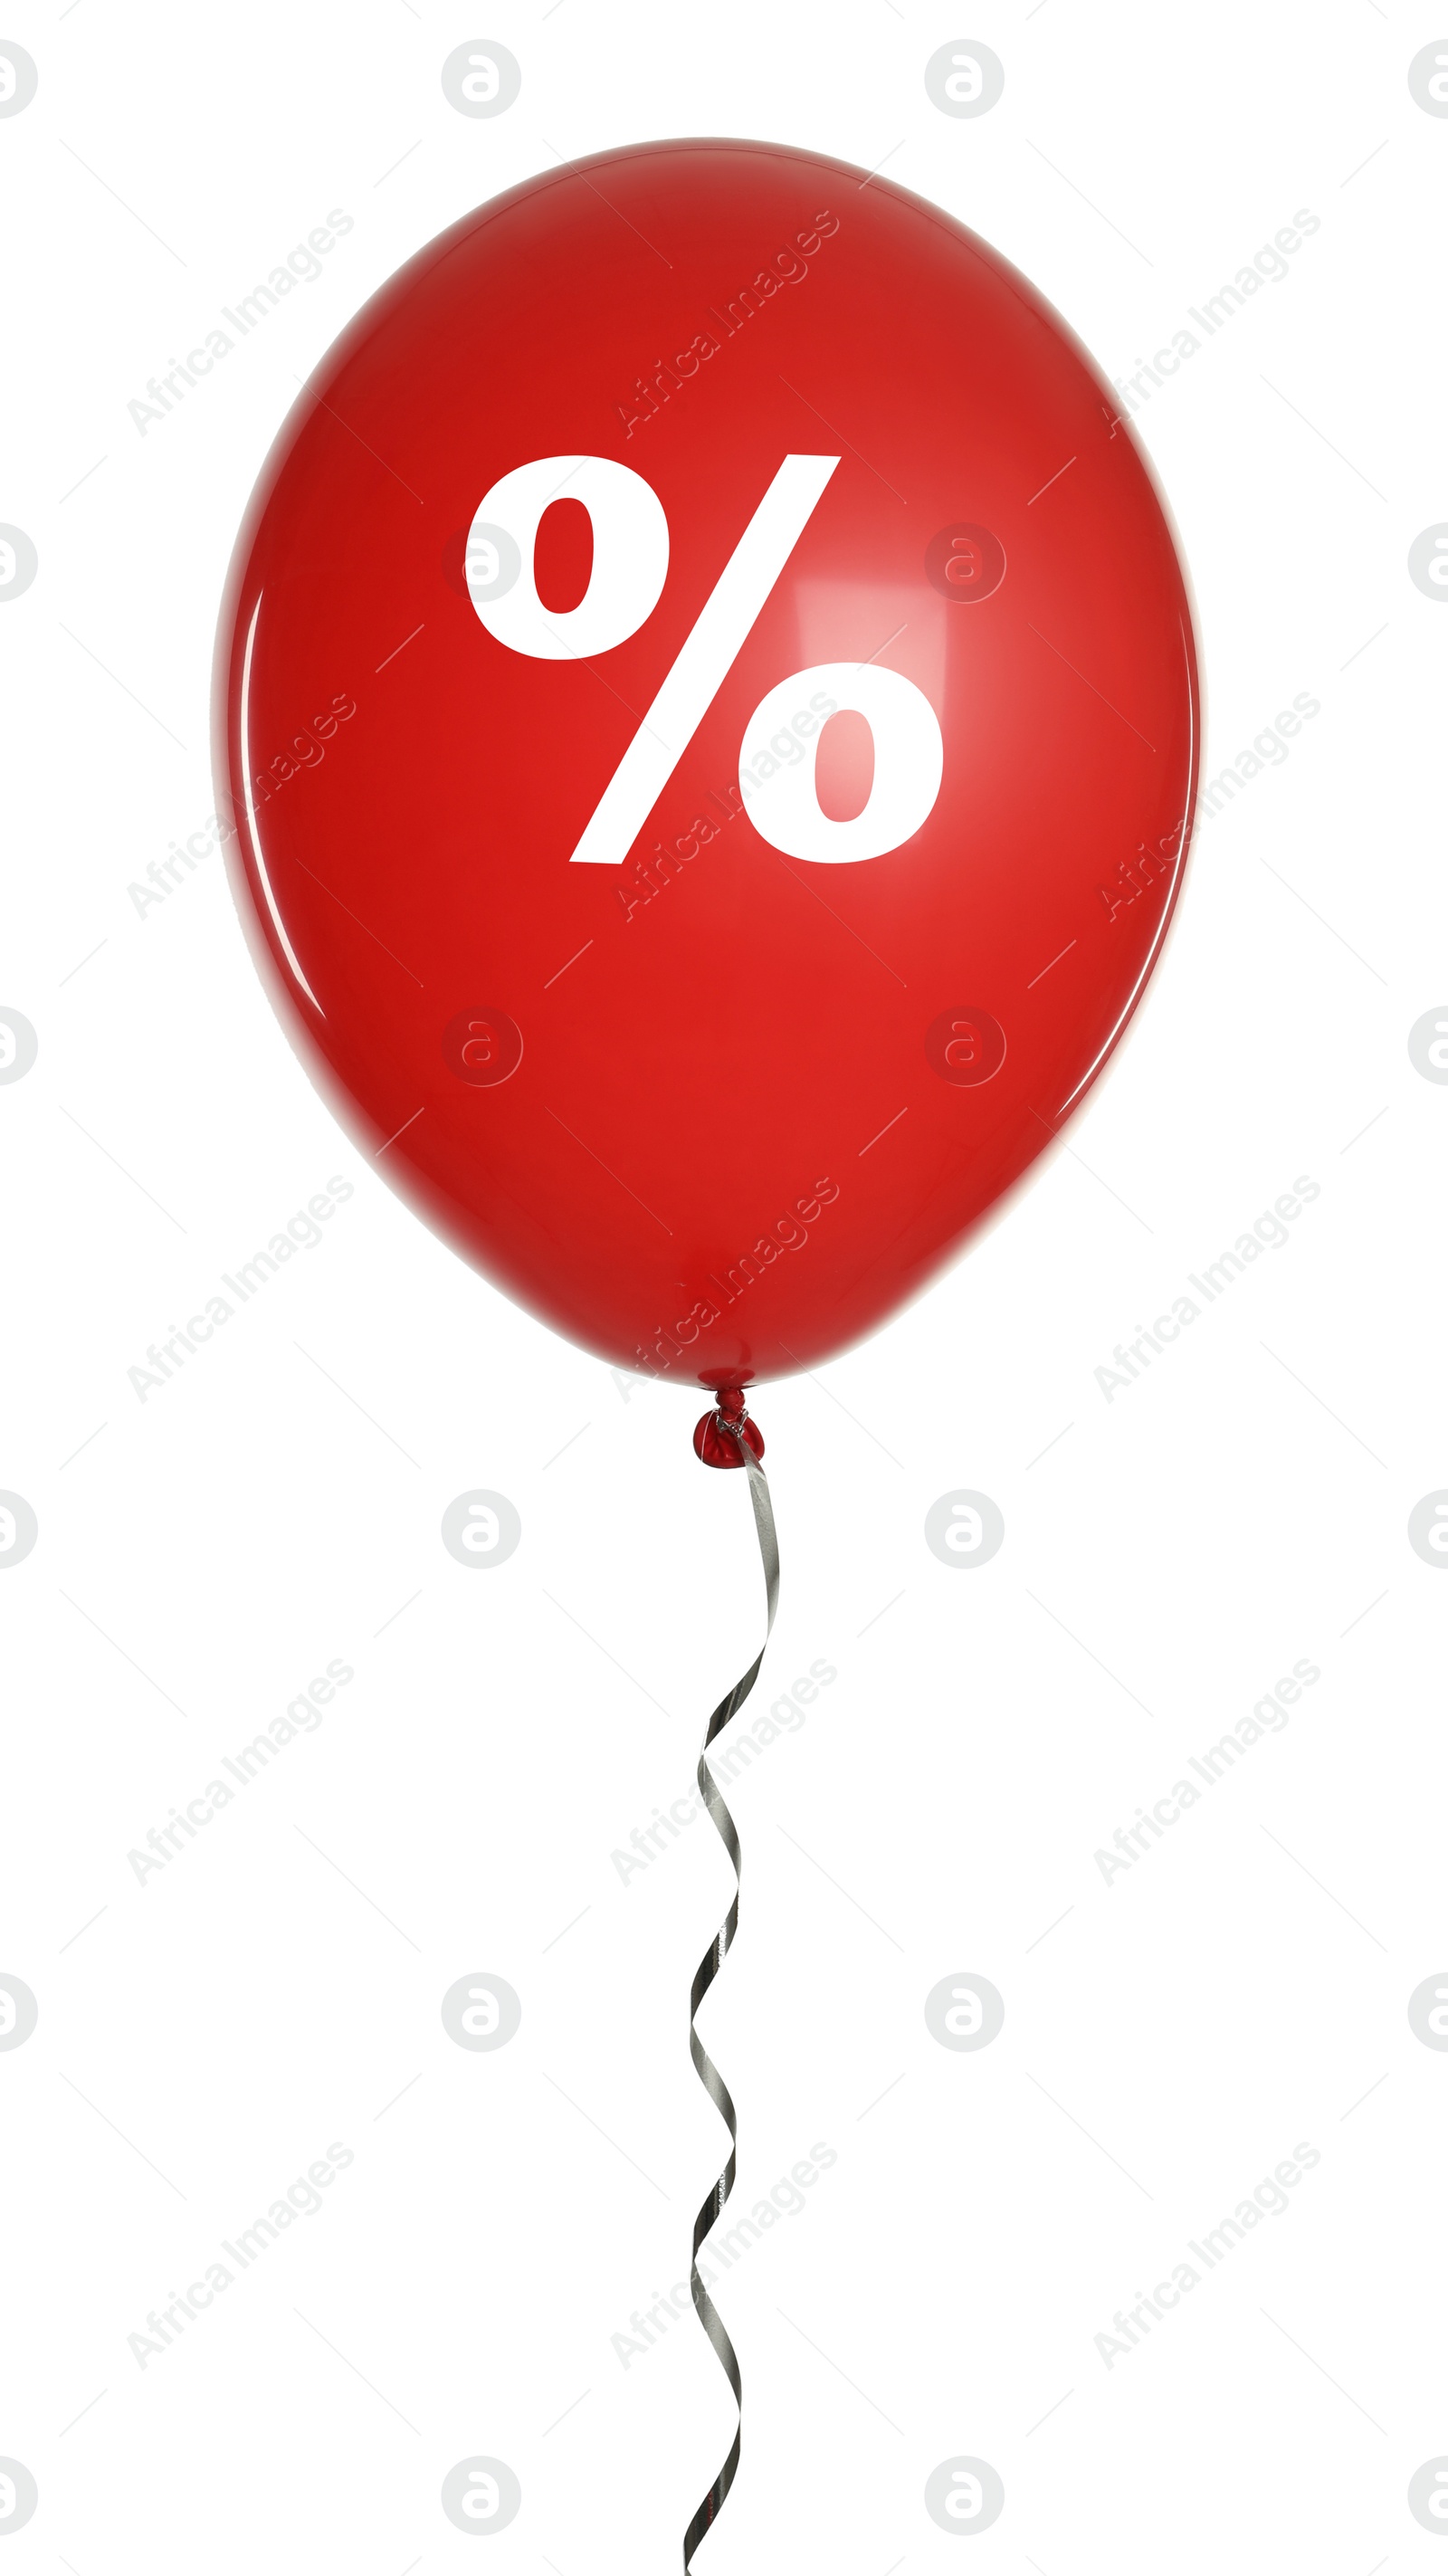 Image of Discount offer. Red balloon with percent sign on white background